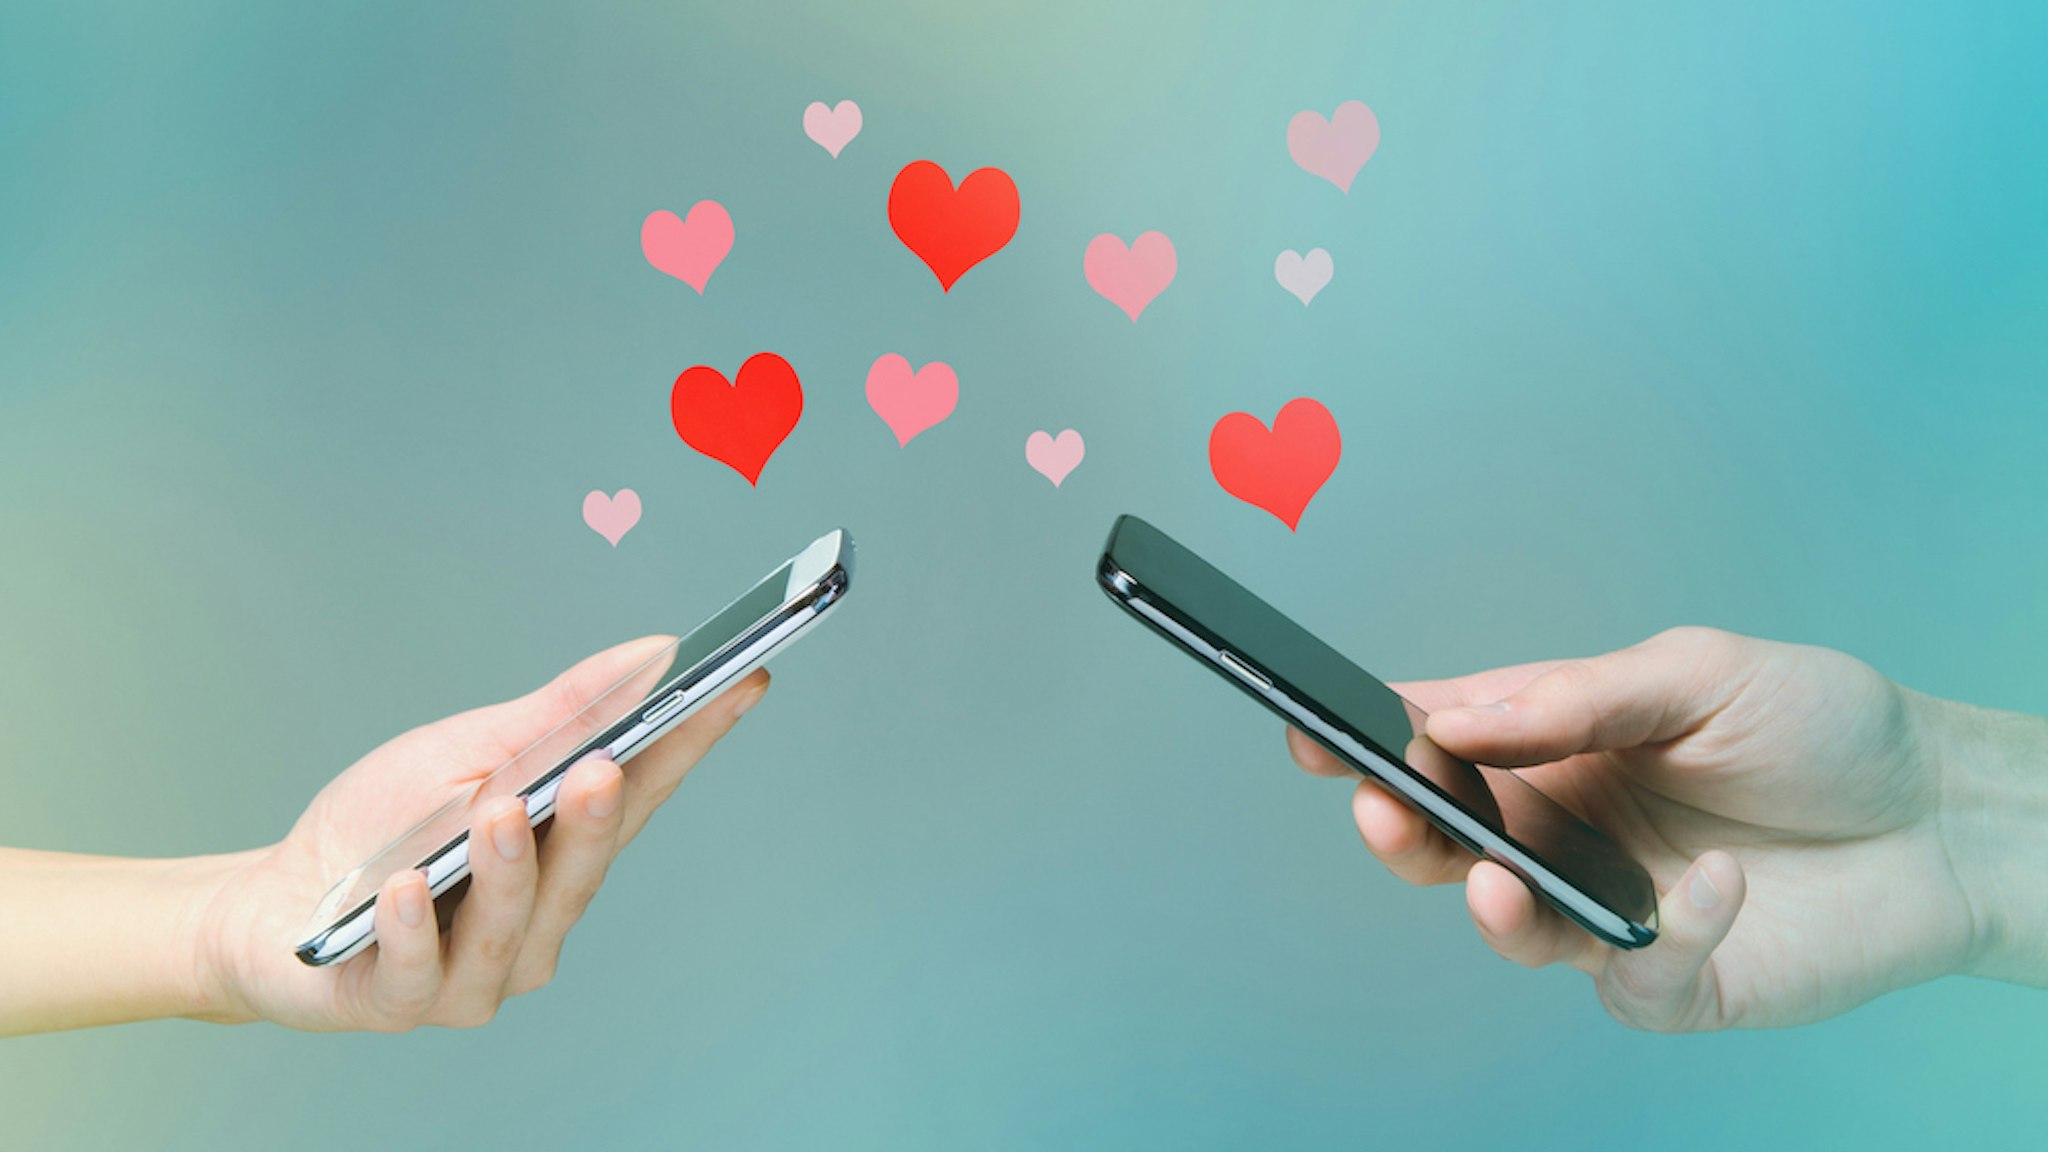 Young man and woman's hands holding smart phones with hearts floating over (PM Images/Getty Images)